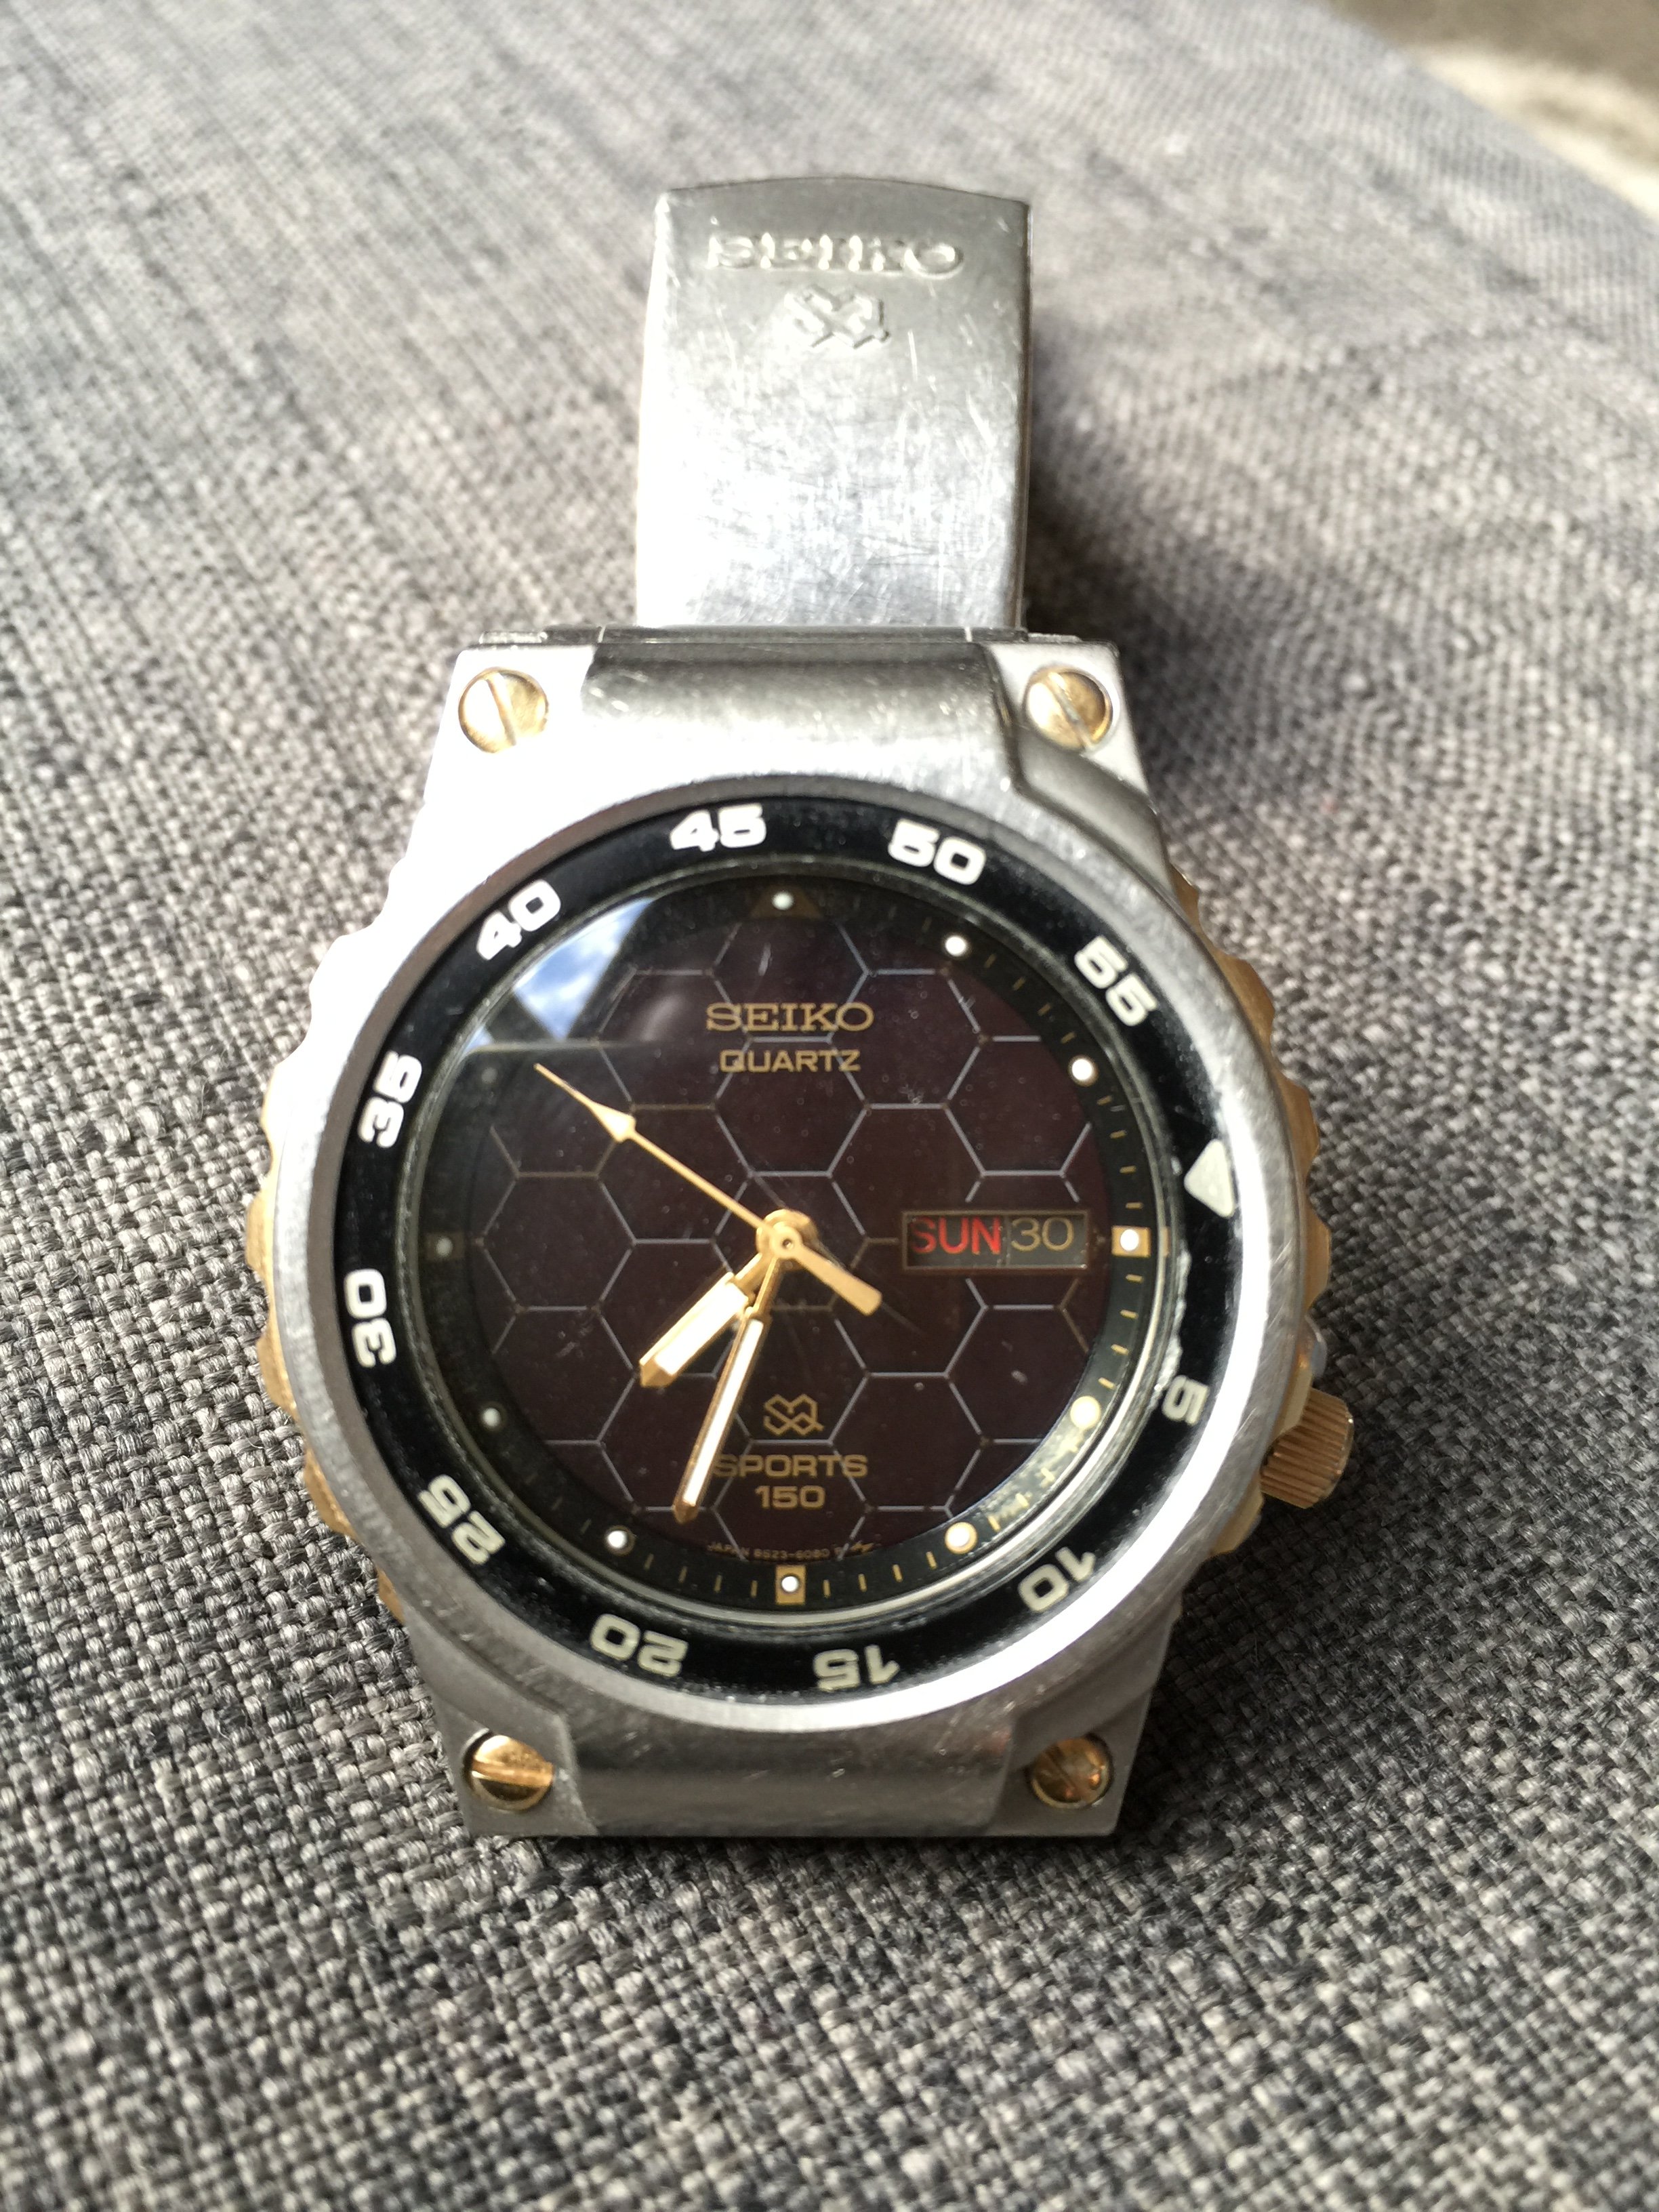 Ancient Seiko Sports 150 in need of repair | Omega Forums